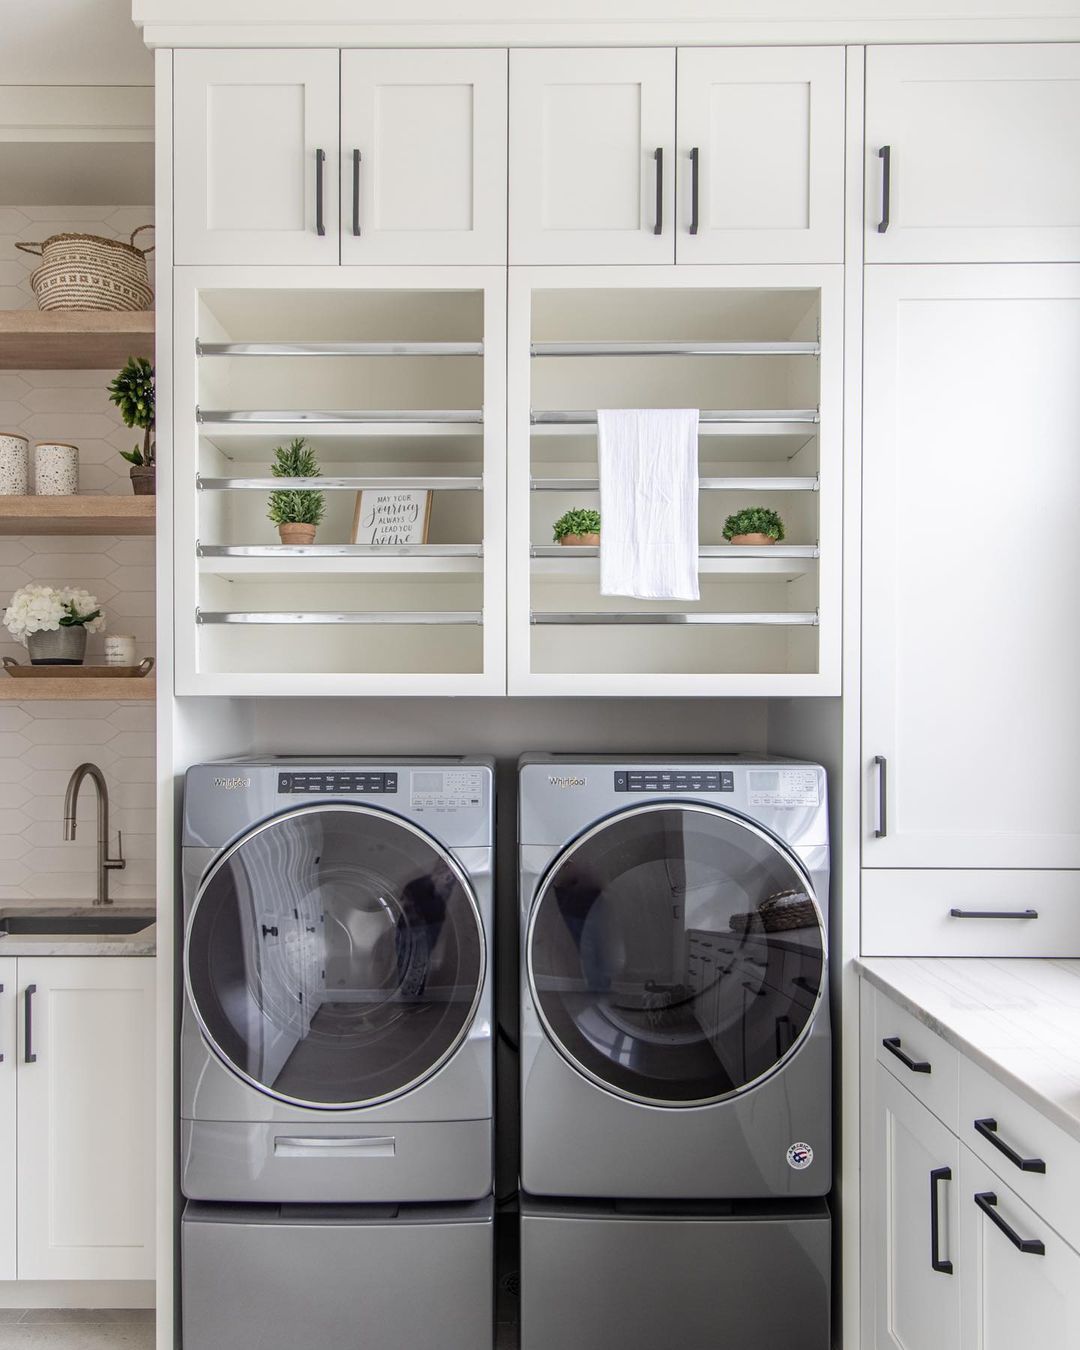 White laundry room with side-by-side washer and dryer unit below drying racks. Photo by Instagram user @kimberlyparkerdesign